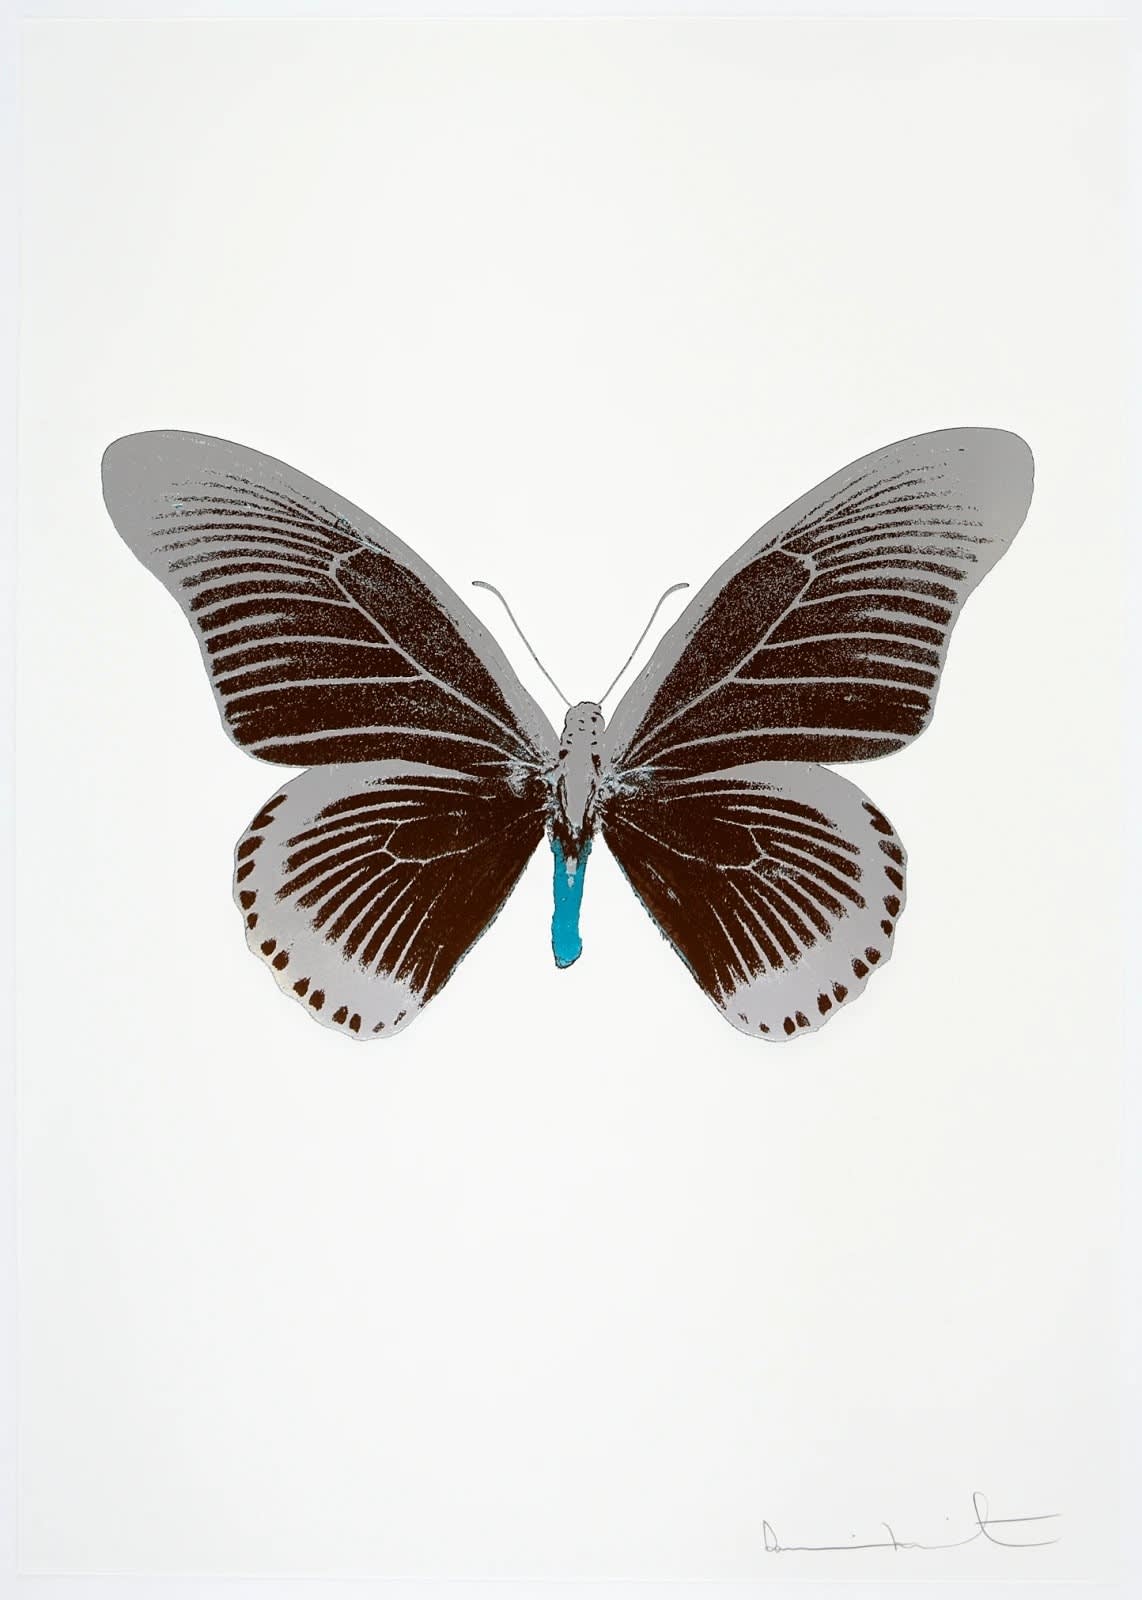 Damien Hirst, The Souls IV – Chocolate/Silver Gloss/Topaz, 2010